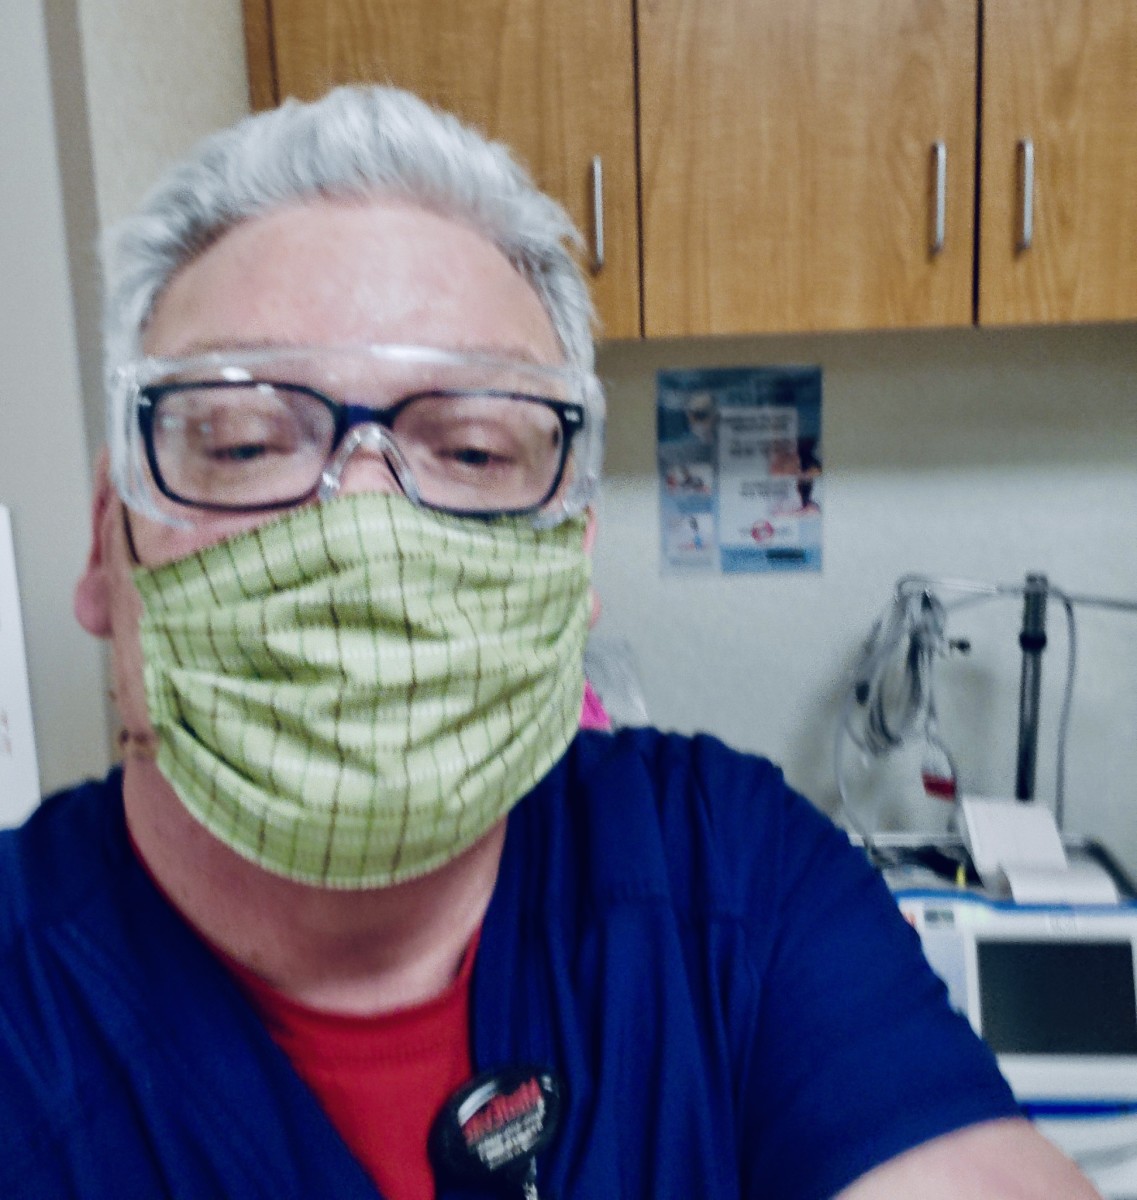 A break from the full PPE with a cloth mask made by a caring friend.